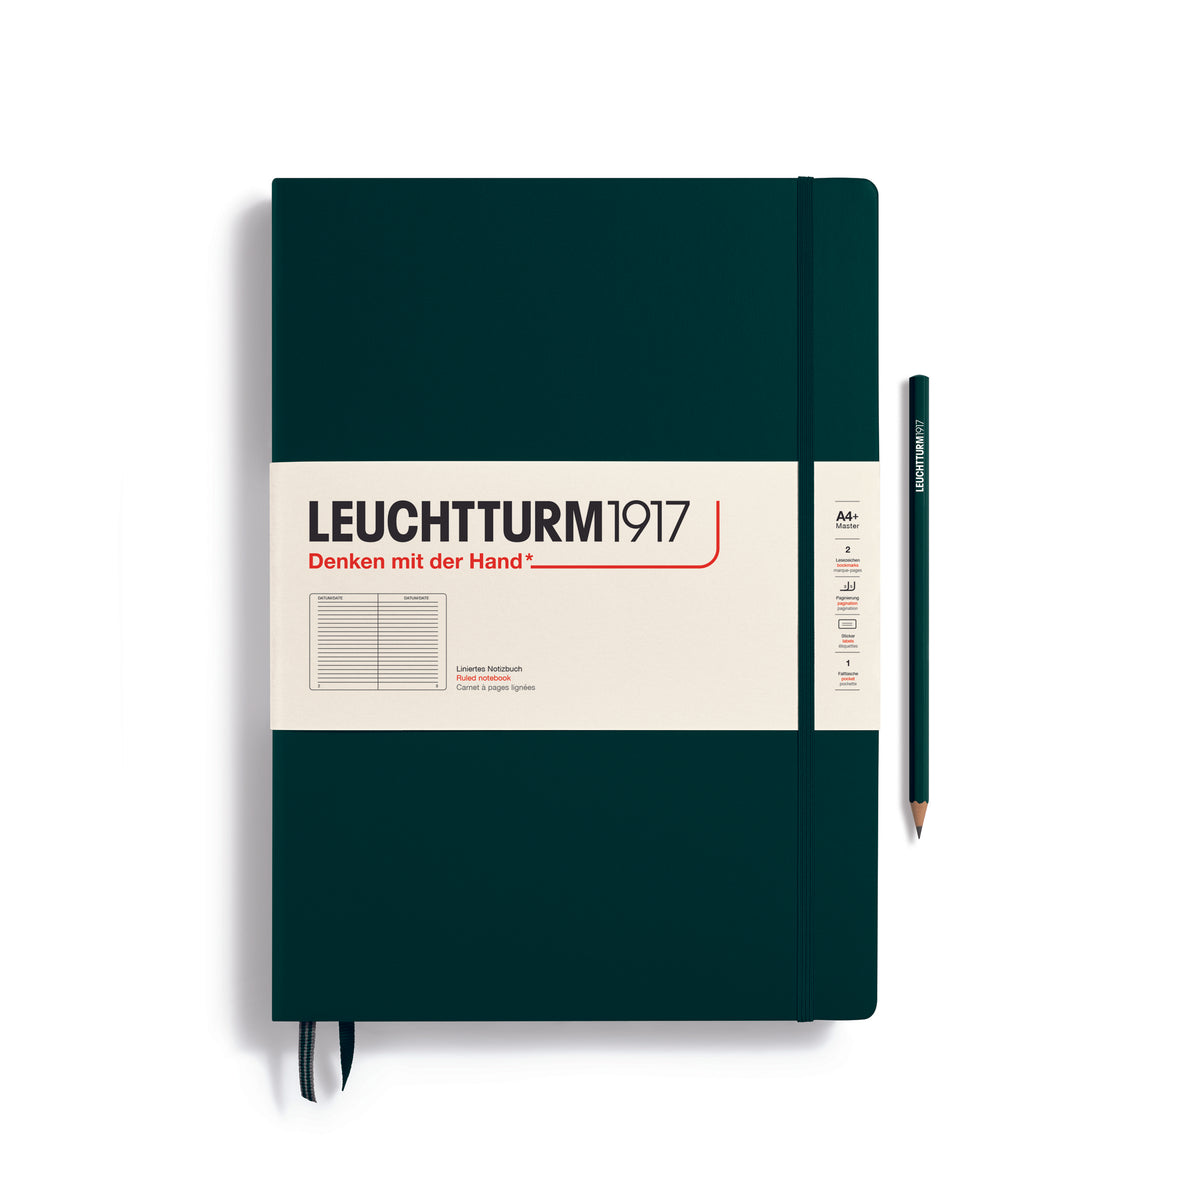 A large forest green notebook with a white paper band around it with the logo of the brand Leuchtturm1917. Below this is an image of the page ruling inside - in this case, ruled or lined. It has two page marker ribbons showing at the bottom near the binding and a matching colour elastic notebook closure holding it neatly together. A forest green Leuchtturm pencil is shown at the side of the book.